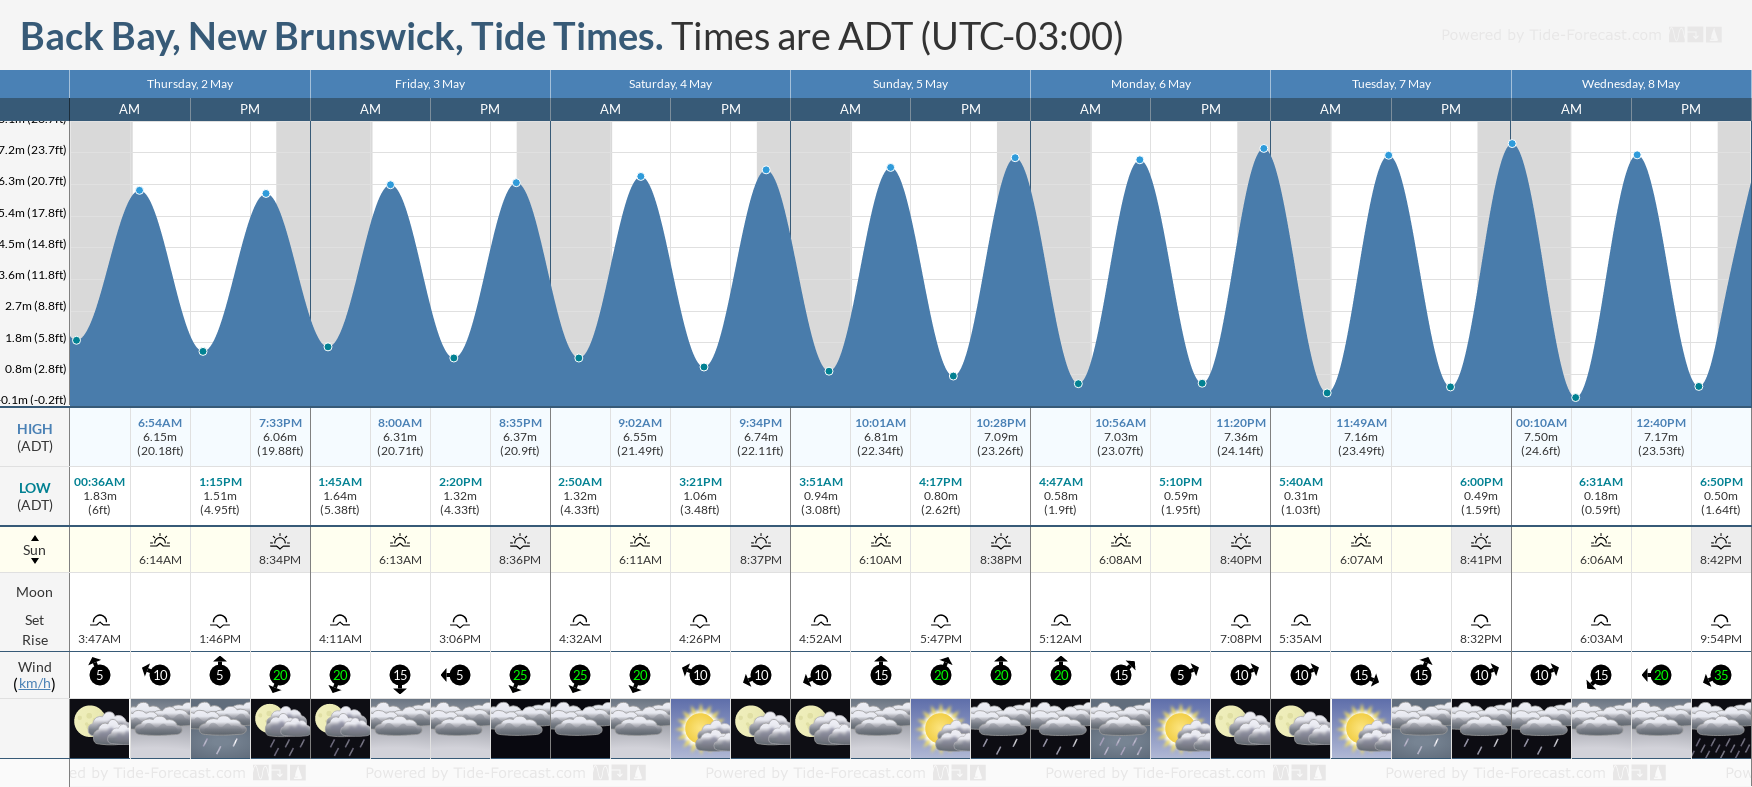 Back Bay, New Brunswick Tide Chart including high and low tide times for the next 7 days